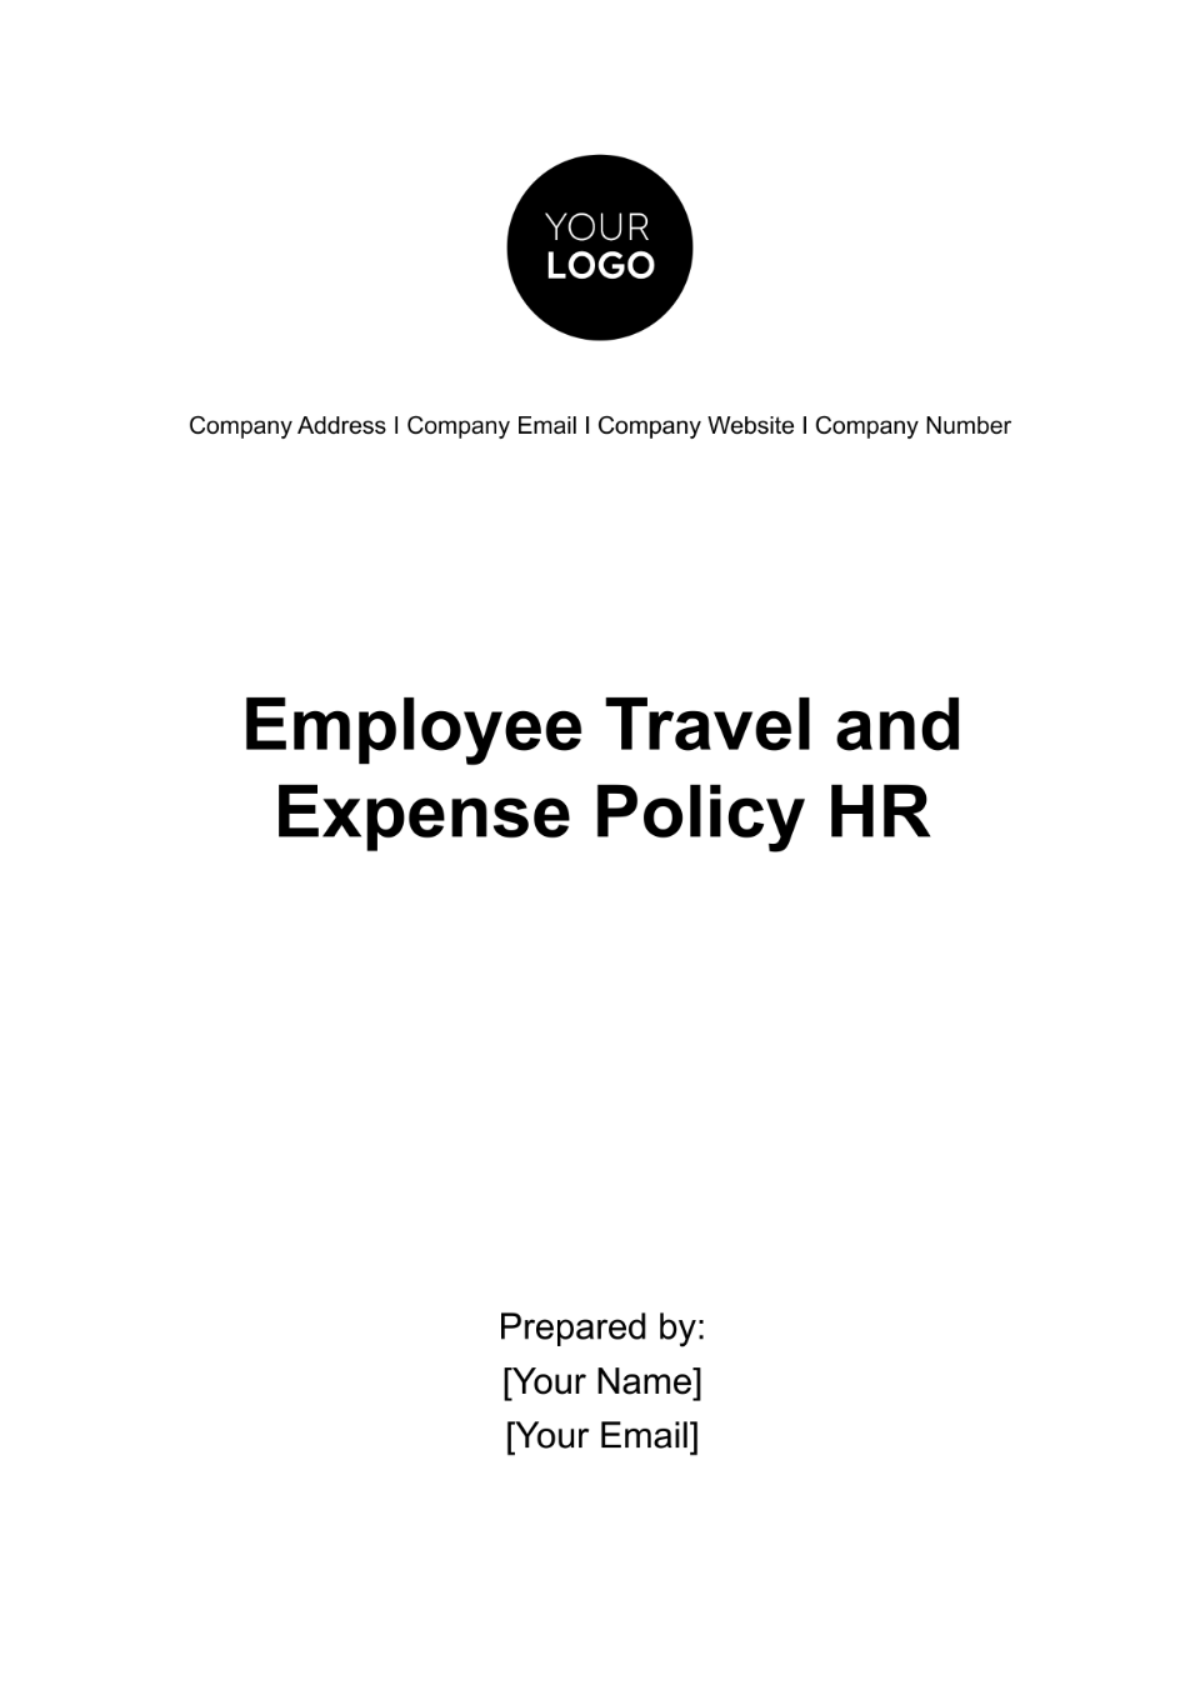 Employee Travel and Expense Policy Manual HR Template